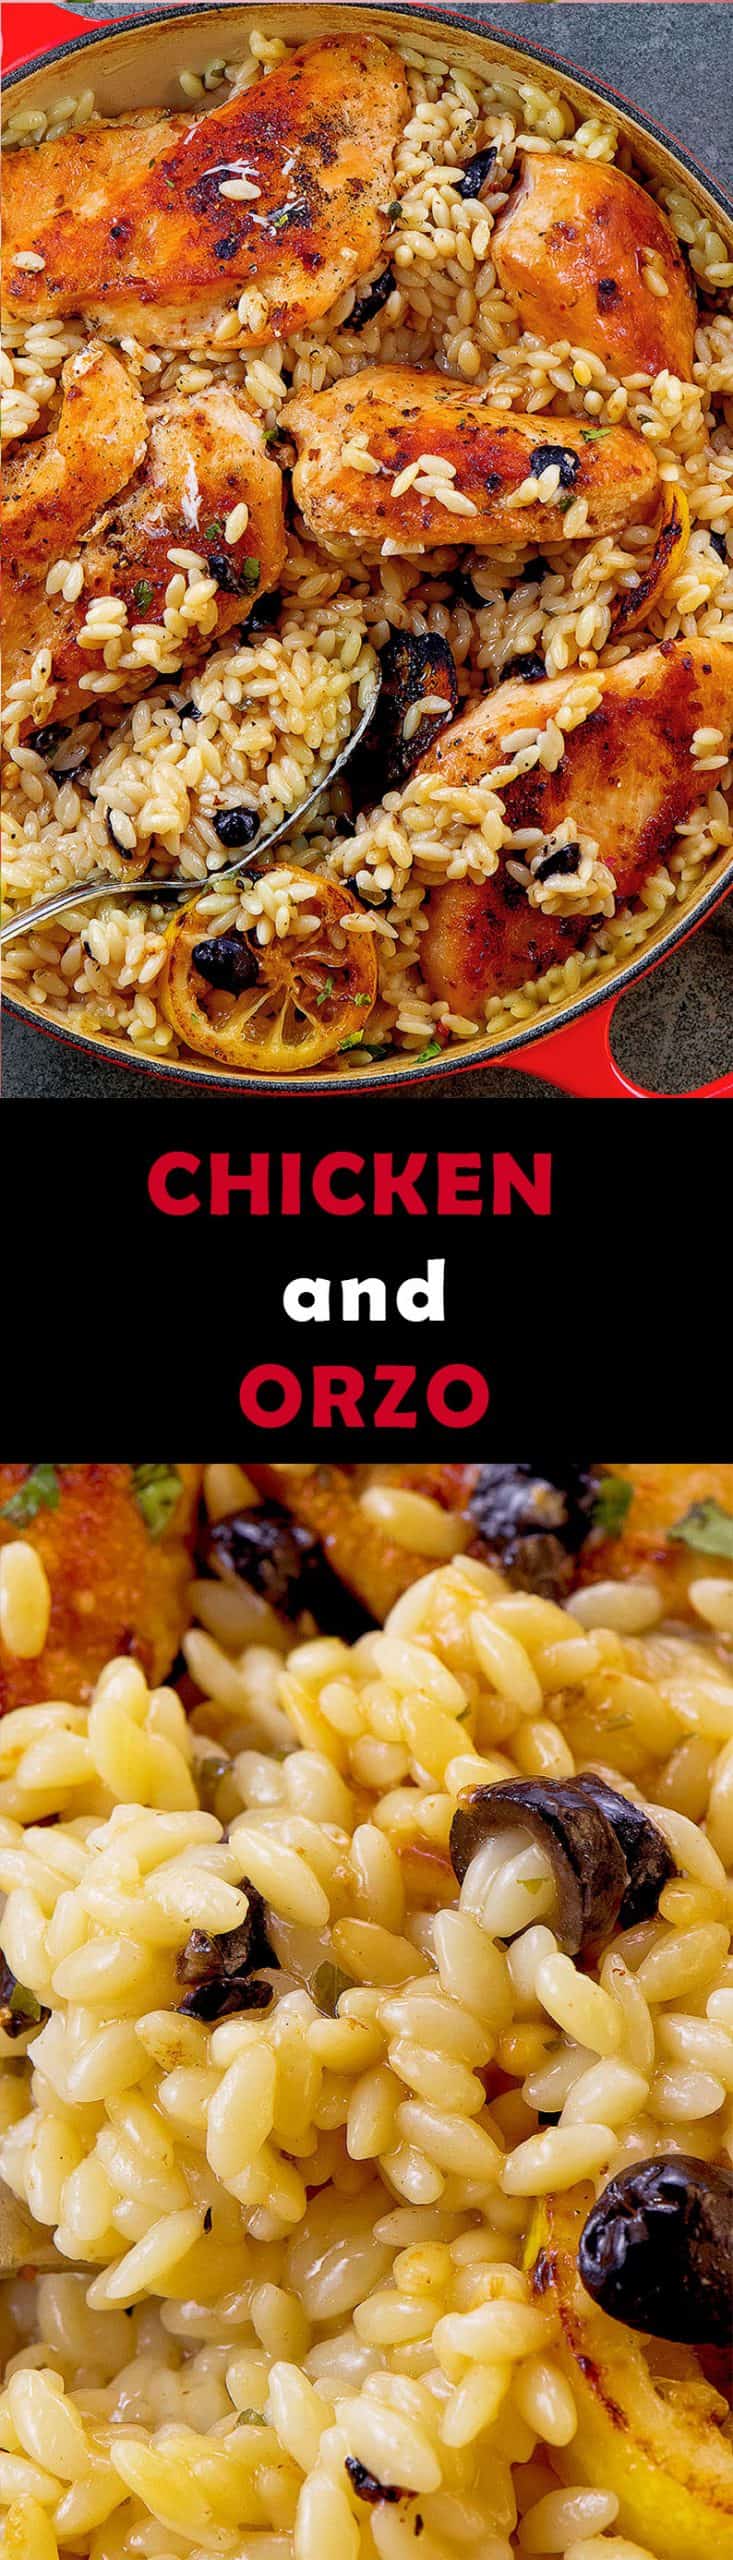 chicken-and-orzo